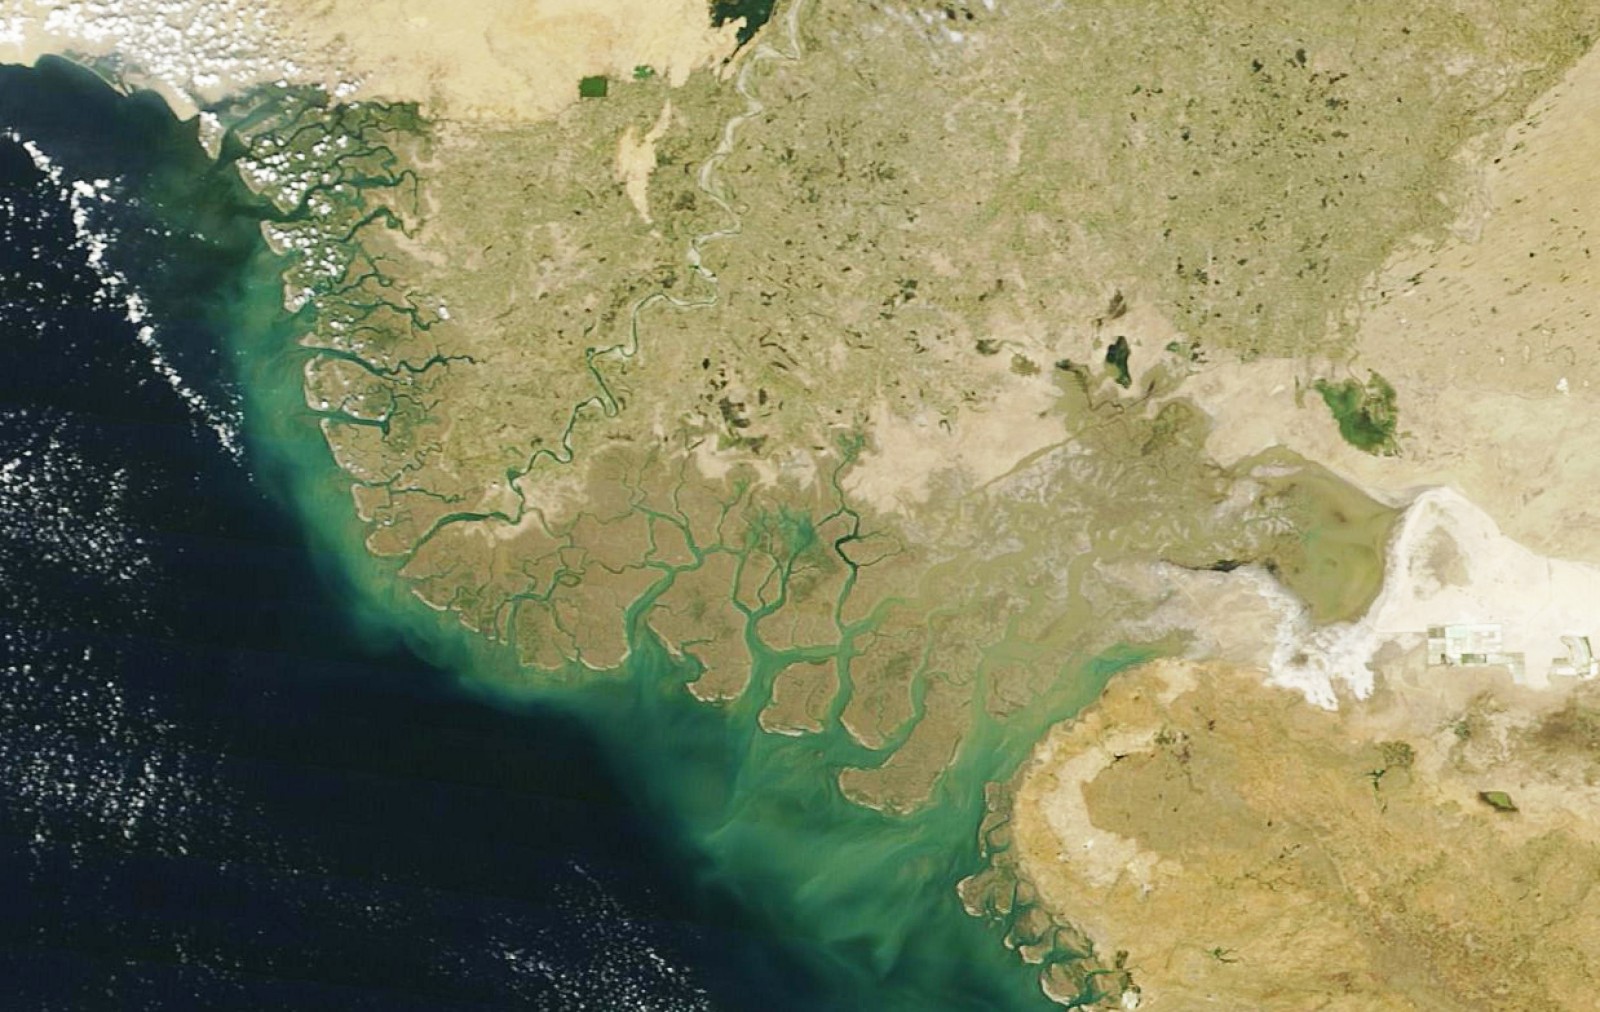 The Indus River travels 3,000 kilometers from the Himalayas before it empties into the Arabian Sea near Karachi. While groundwater reserves are rapidly declining in the upper reaches of the basin, groundwater in the lower basin is salty and largely unusable. This image of the Indus River Delta was captured in March 2016 by the Moderate Resolution Imaging Spectroradiometer (MODIS) sensor on board the Terra satellite. Photo courtesy NASA